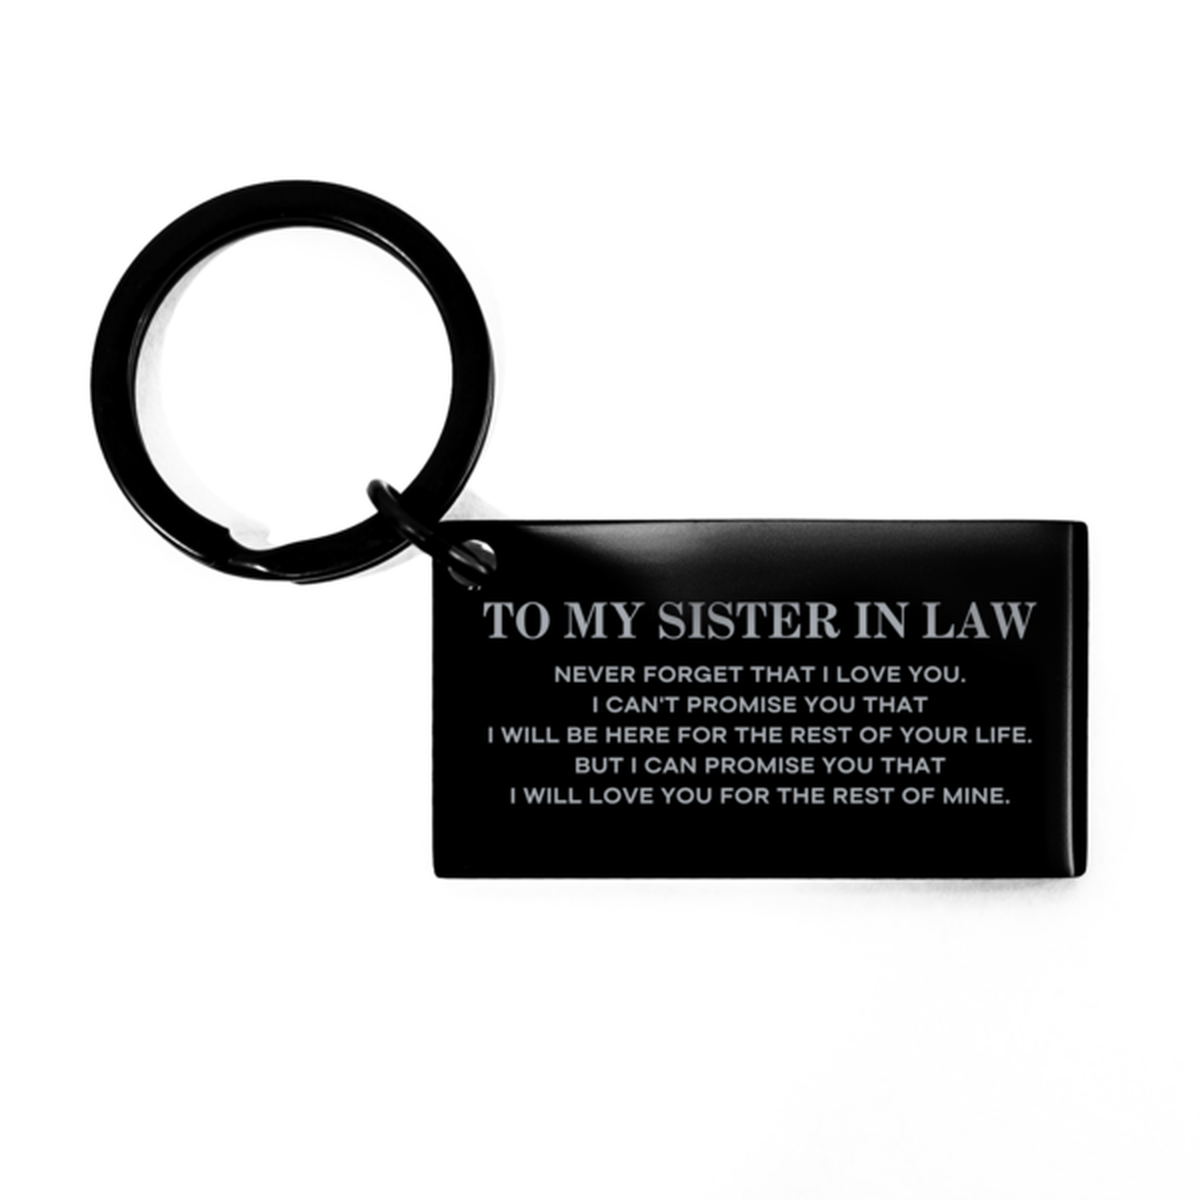 To My Sister In Law Gifts, I will love you for the rest of mine, Love Sister In Law Keychain, Birthday Christmas Unique Keychain For Sister In Law